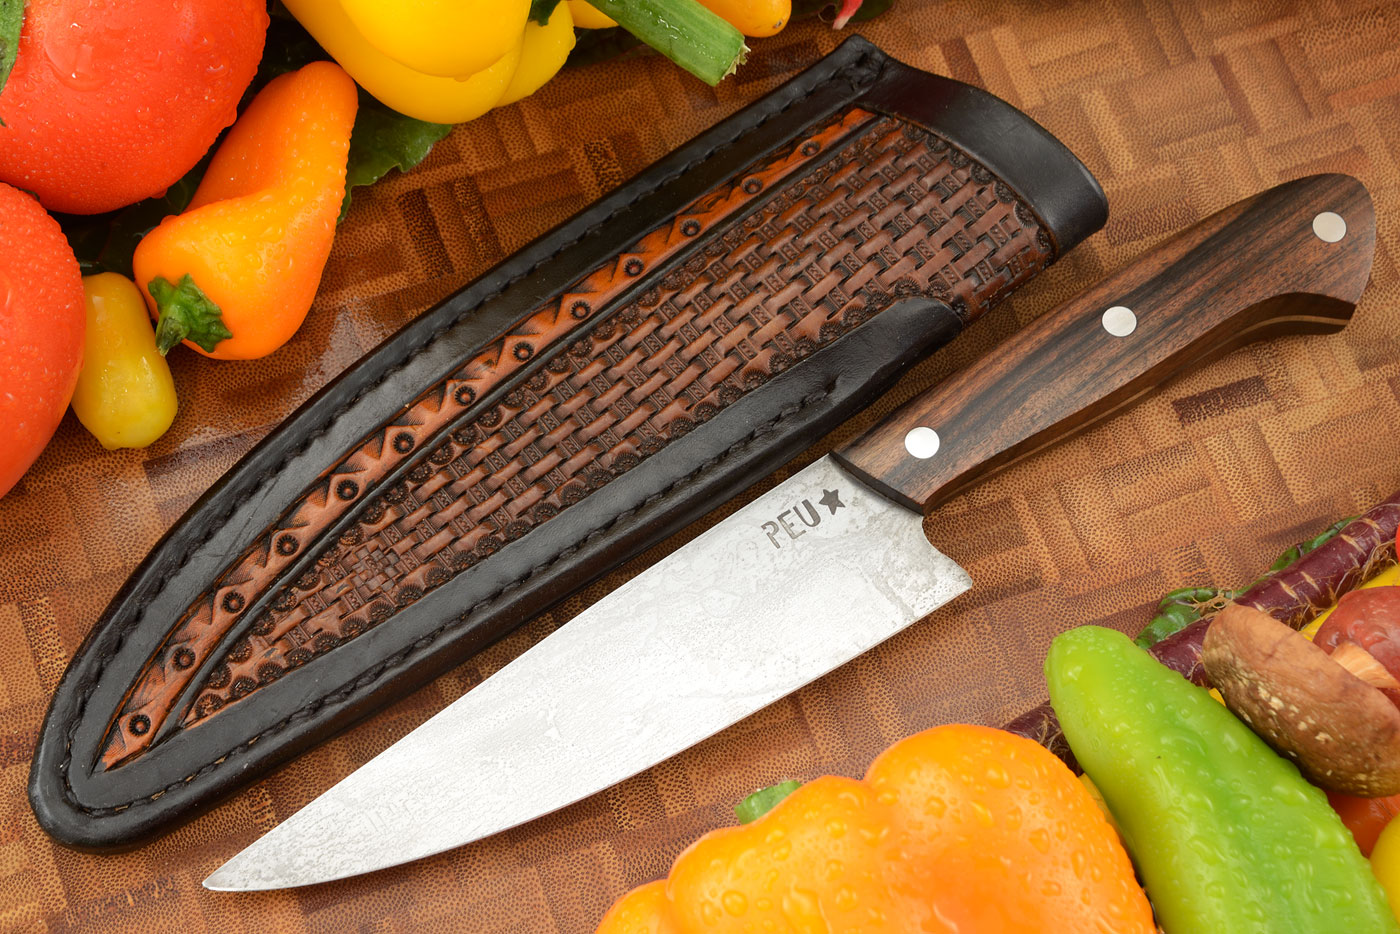 Chef's Utility Knife (Parrillero) with Jacaranda and O2 Carbon Steel